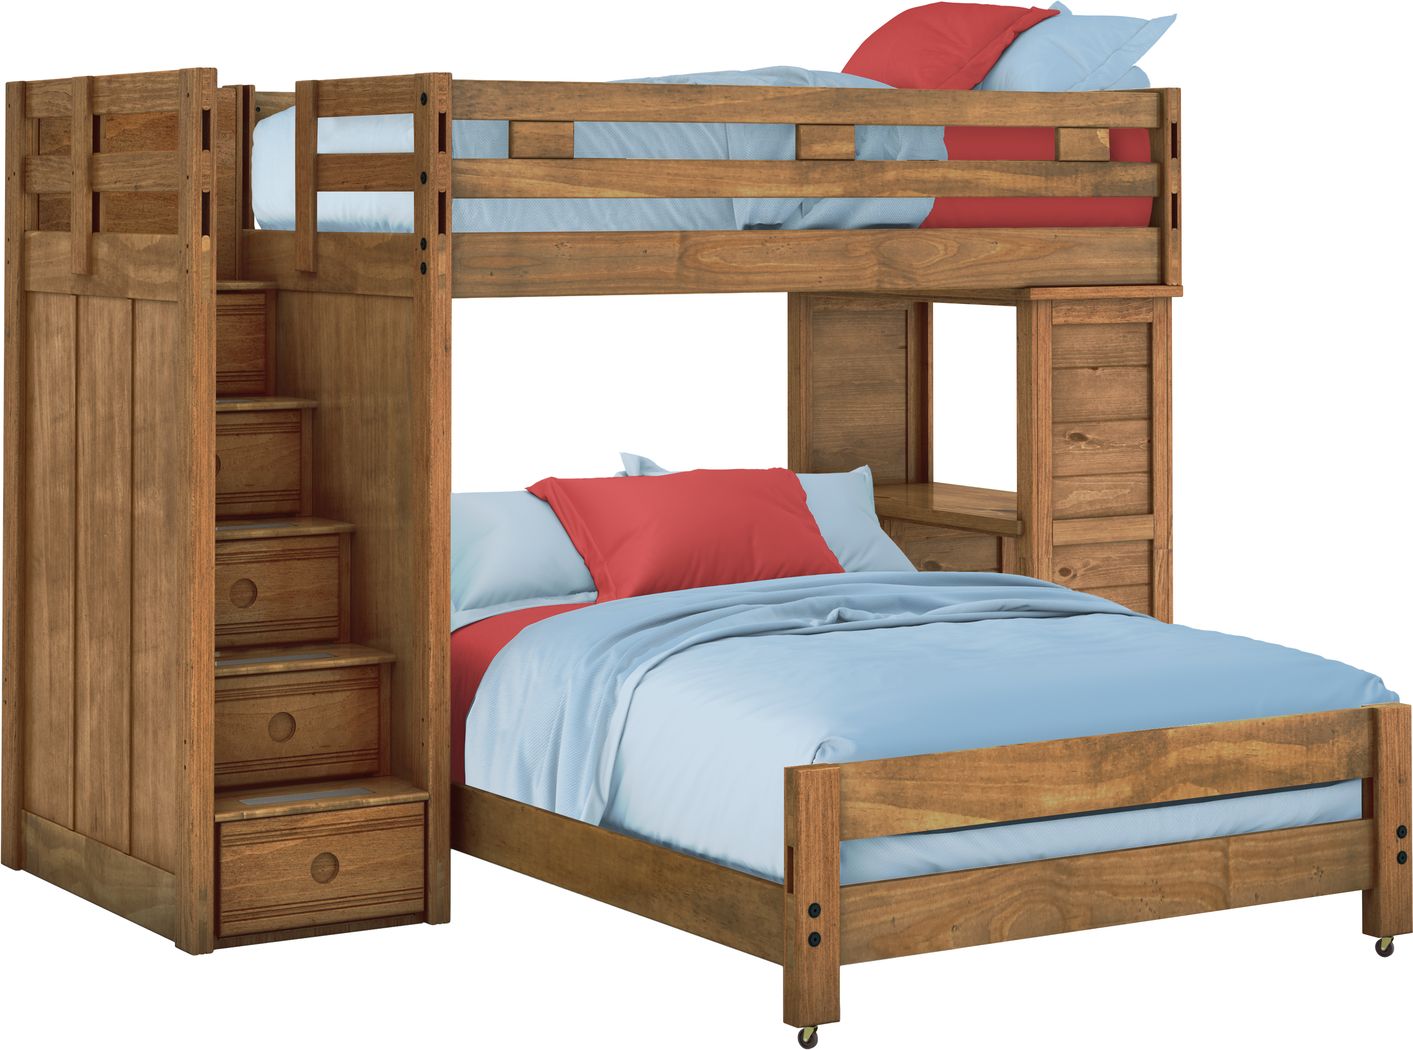 Bunk Beds With Steps, Hardwood Bunk Beds With Stairs